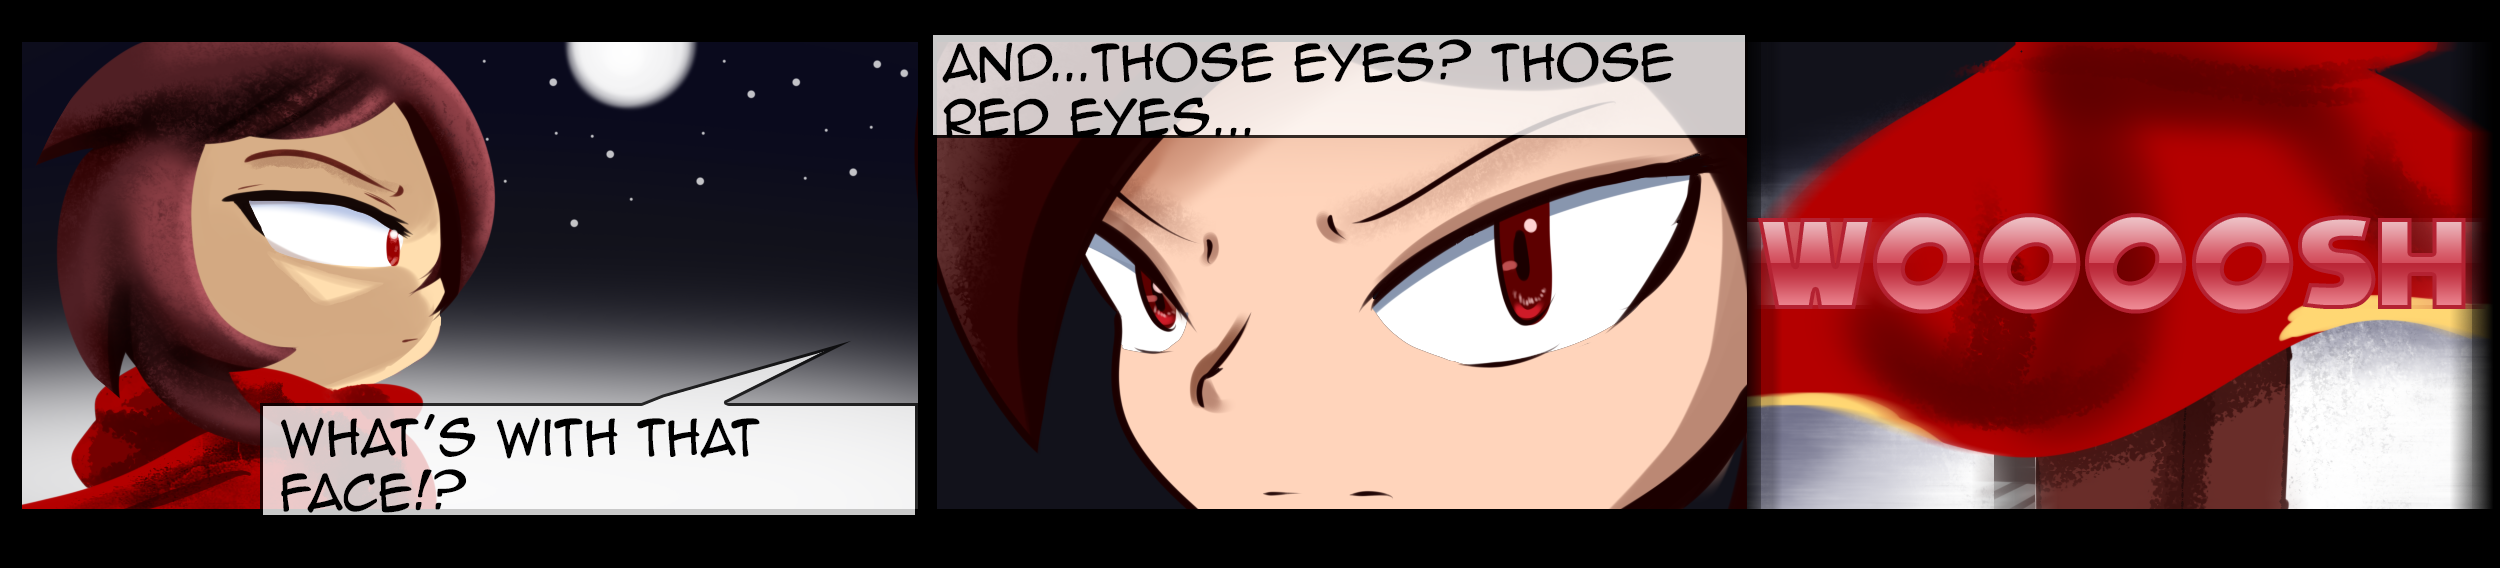 Comic strip of close up of girl in red cloak showing red eyes with boy in background saying "Those red eyes."